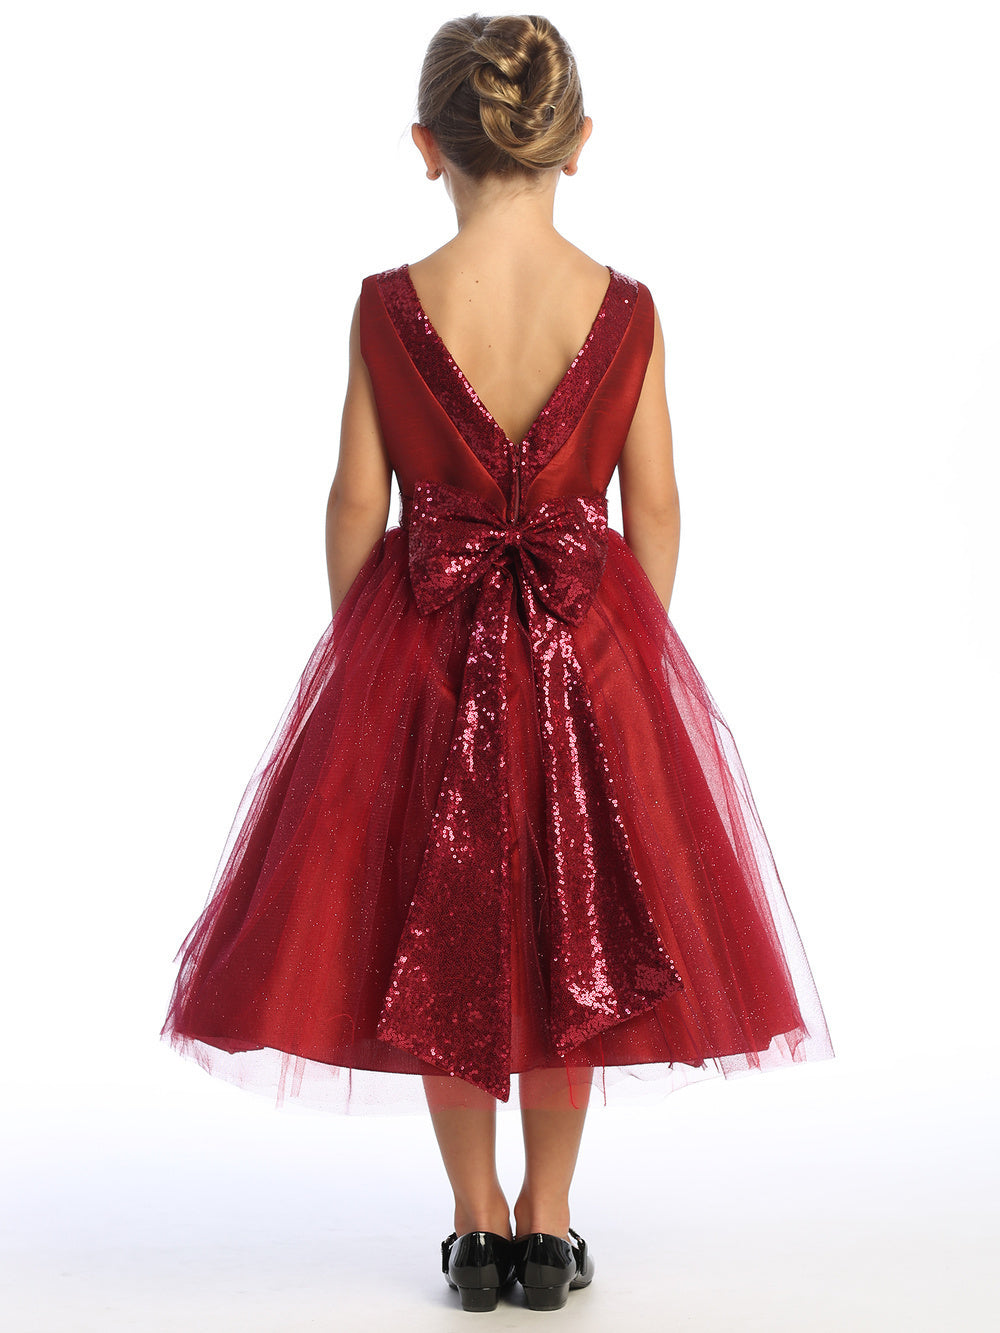 Rich burgundy shantung dress twinkles with sequins on a radiant flower girl.